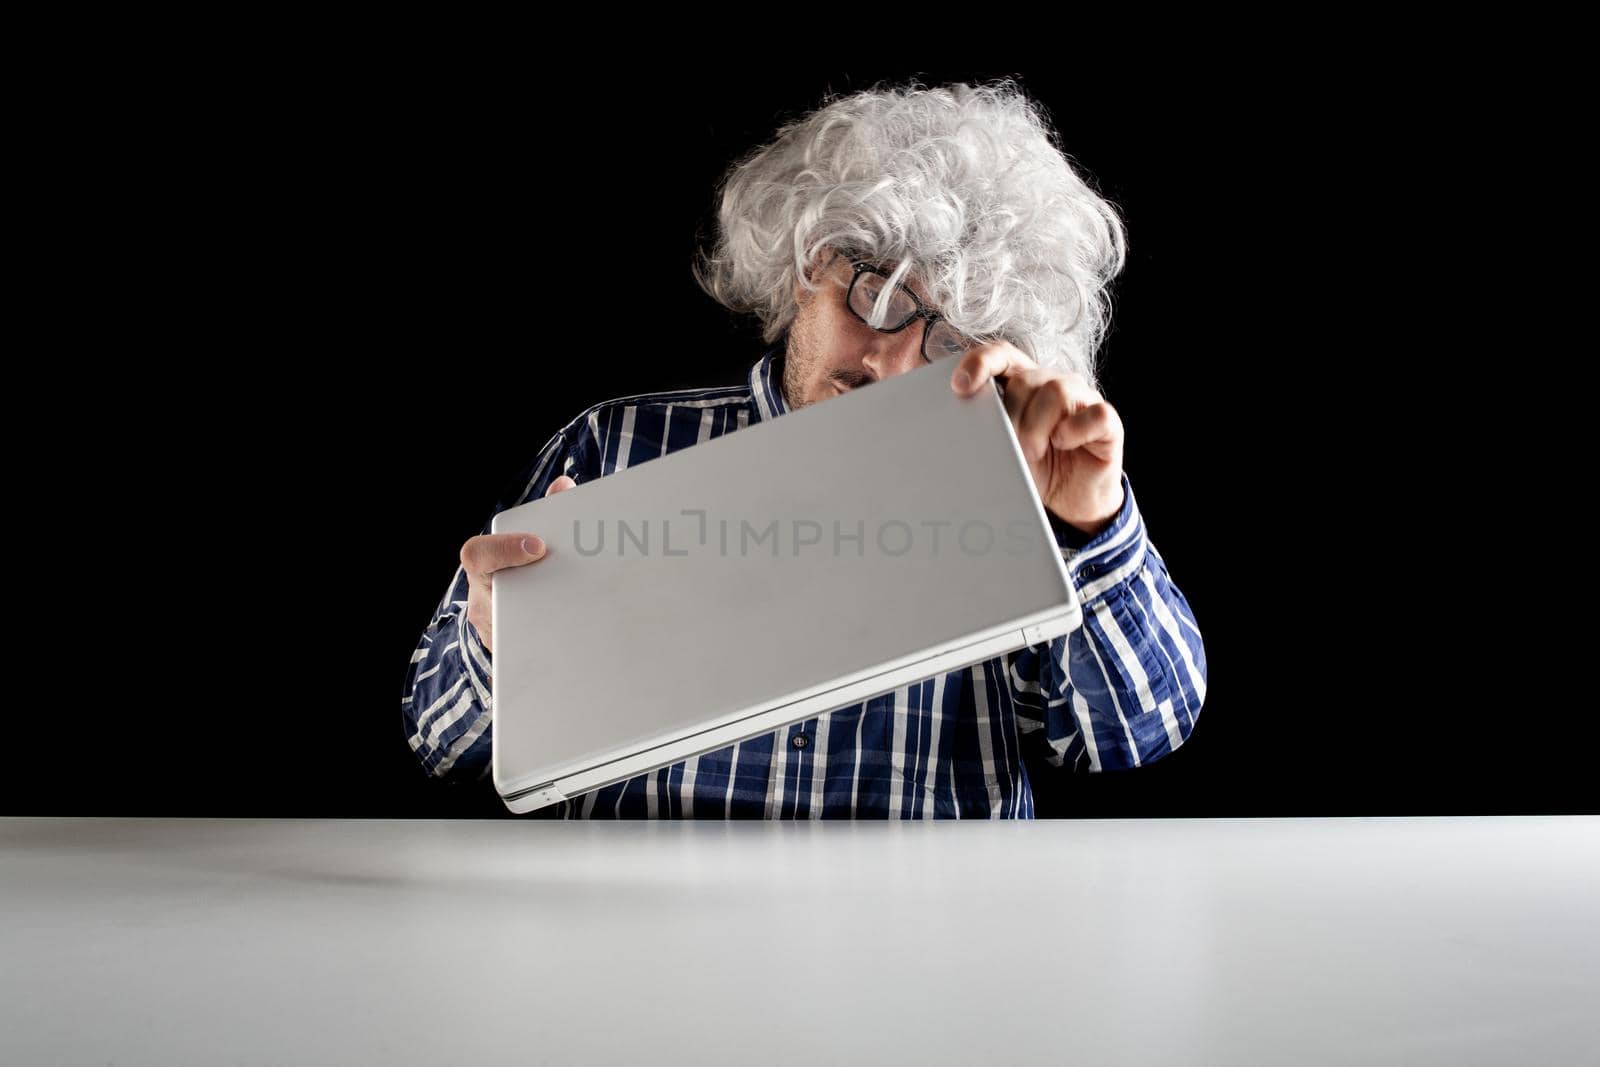 An elderly man does not know how to use the computer. by bepsimage